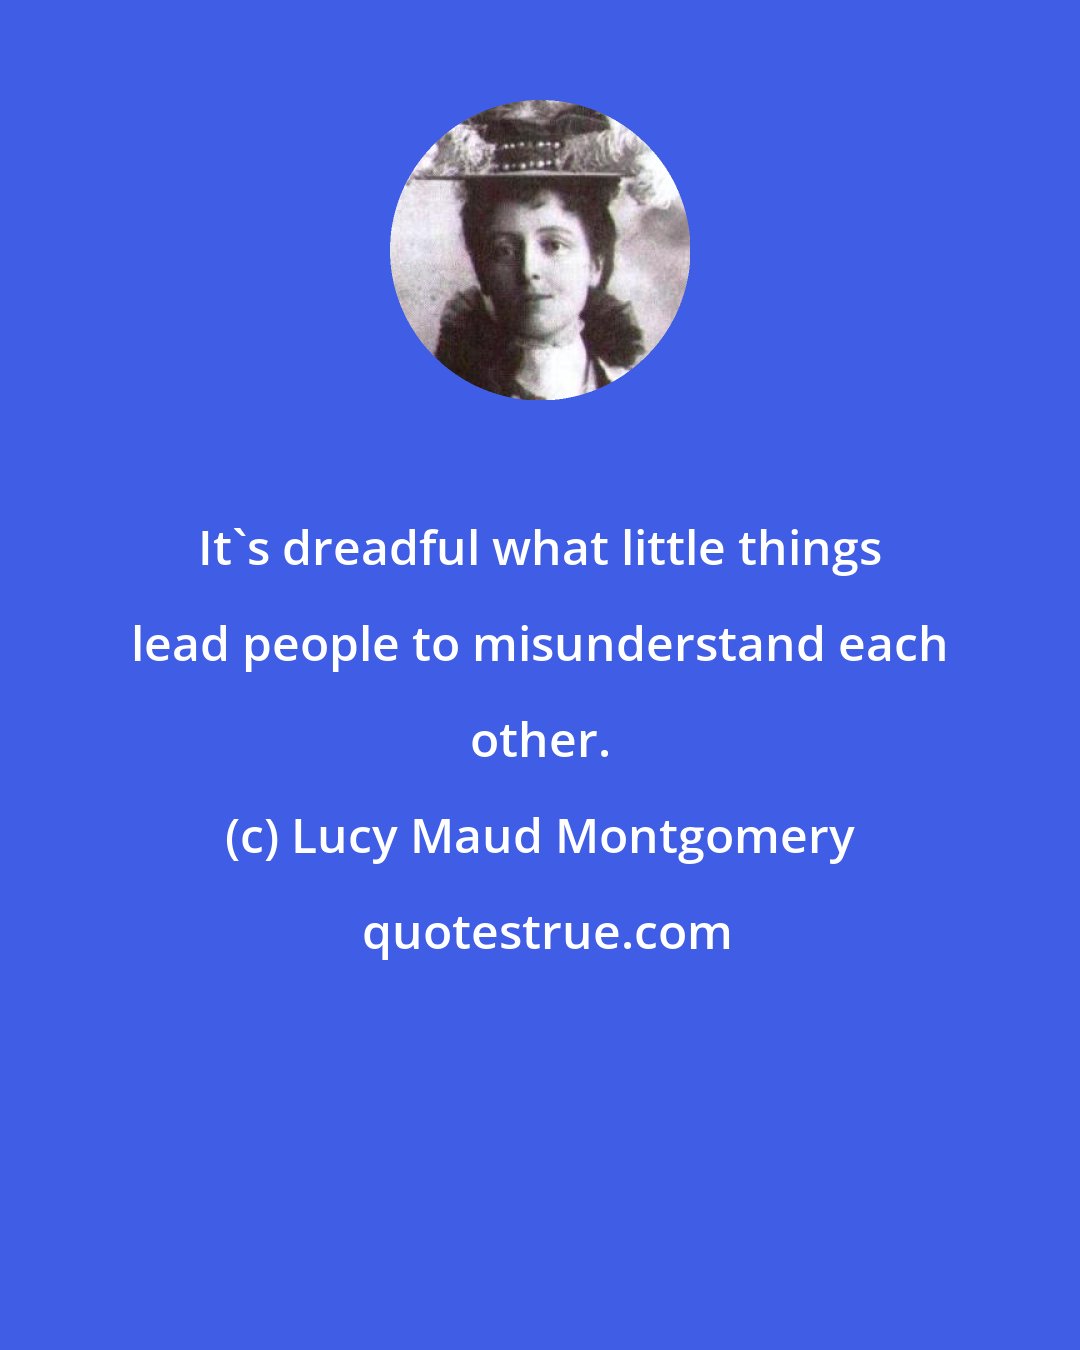 Lucy Maud Montgomery: It's dreadful what little things lead people to misunderstand each other.